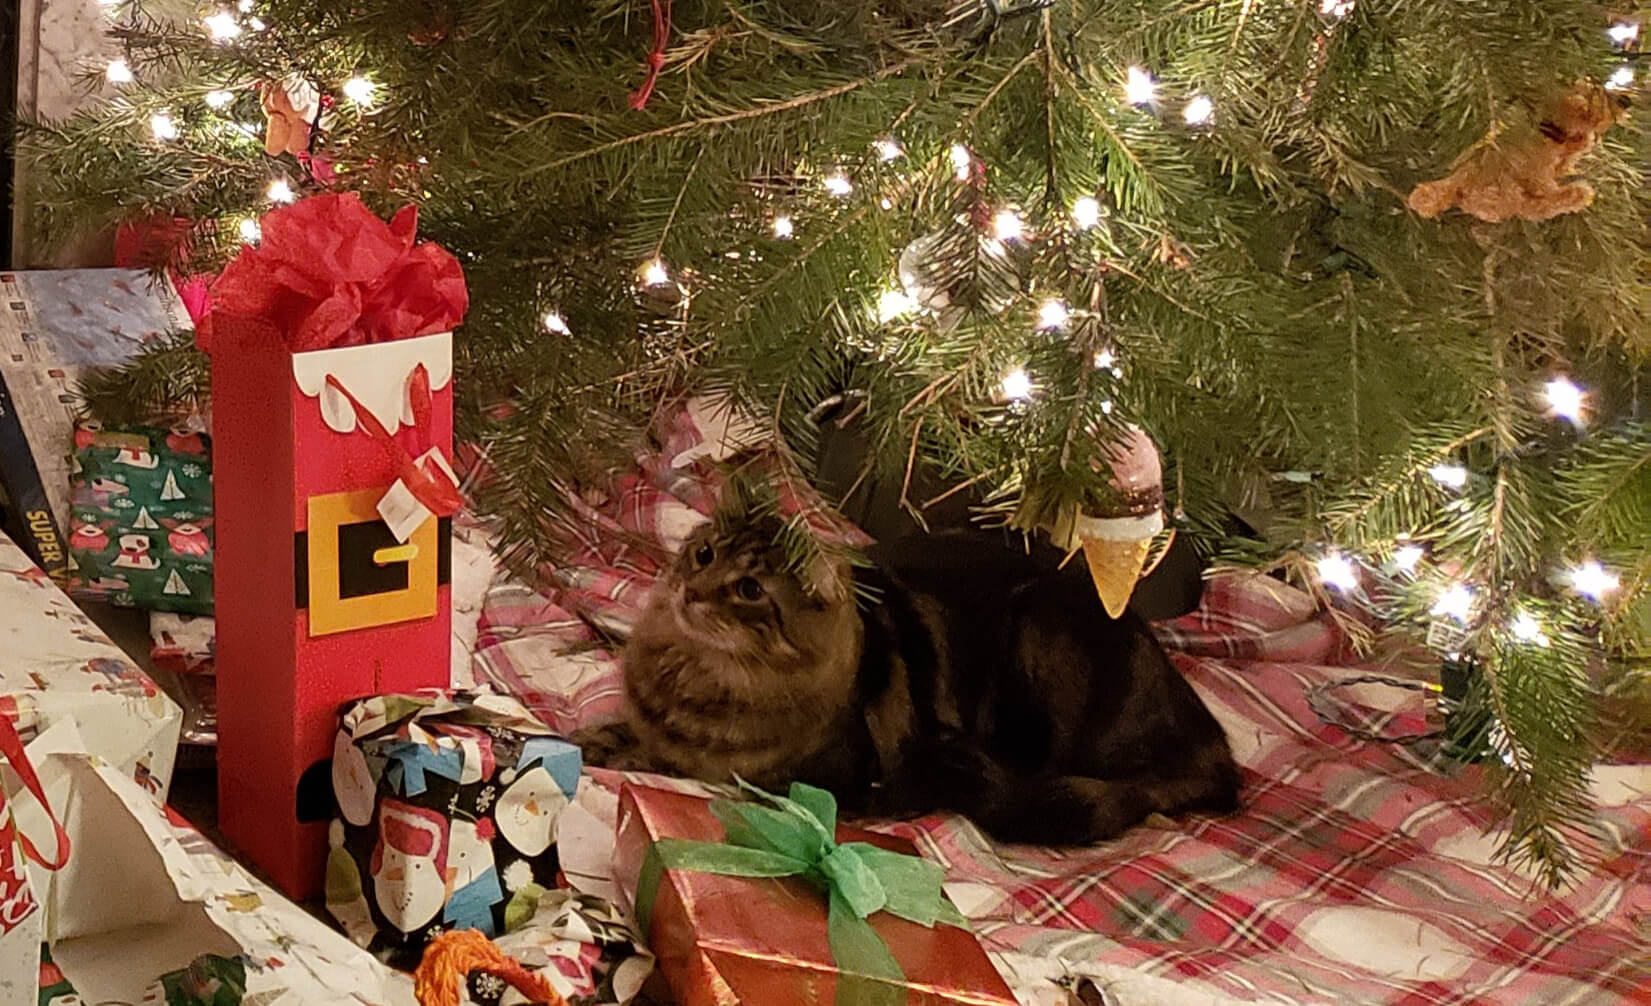 A cat relaxing under a Christmas tree, surrounded by presents.